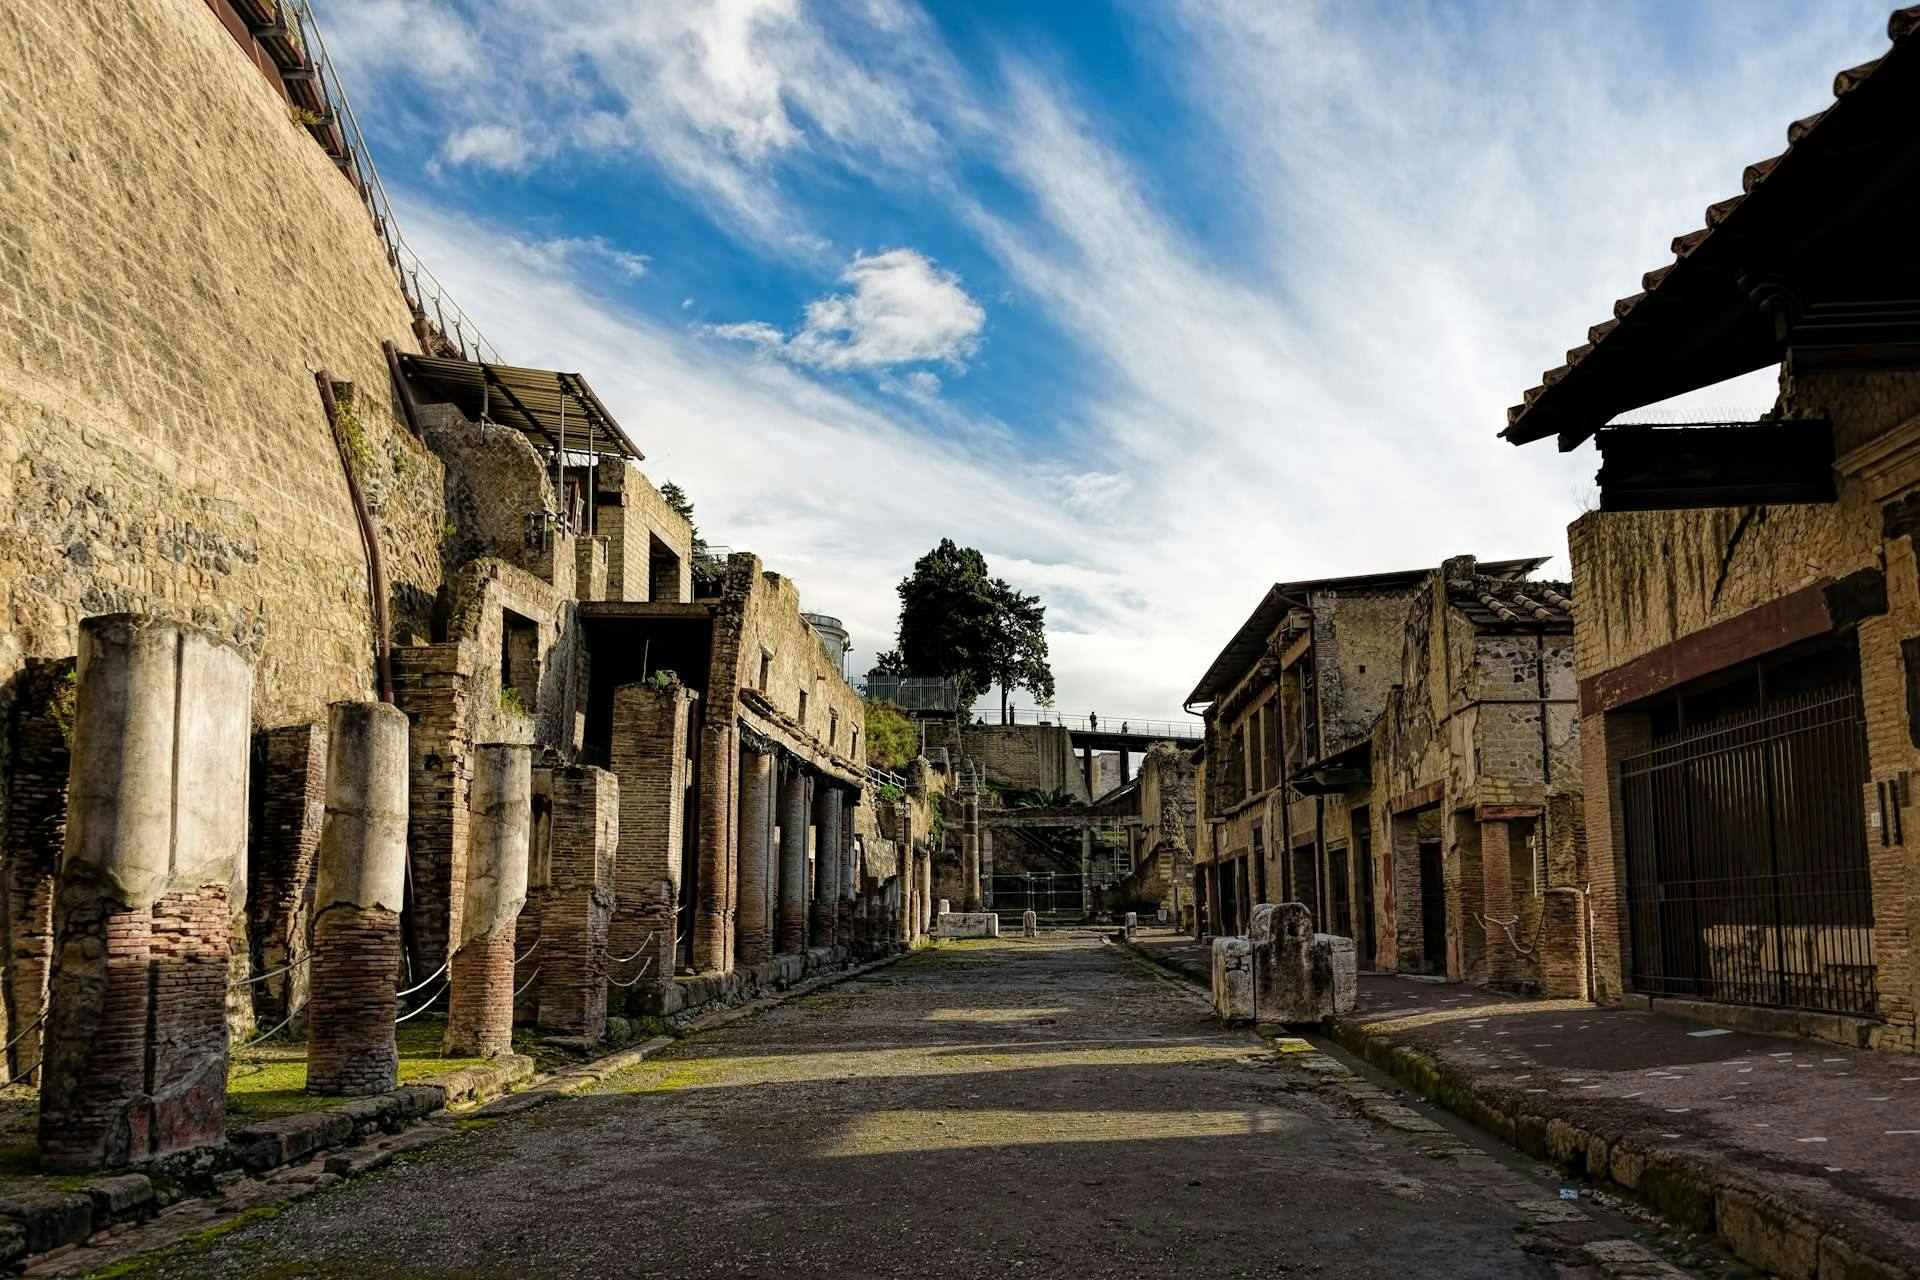 Rediscovering the lost city of Herculaneum